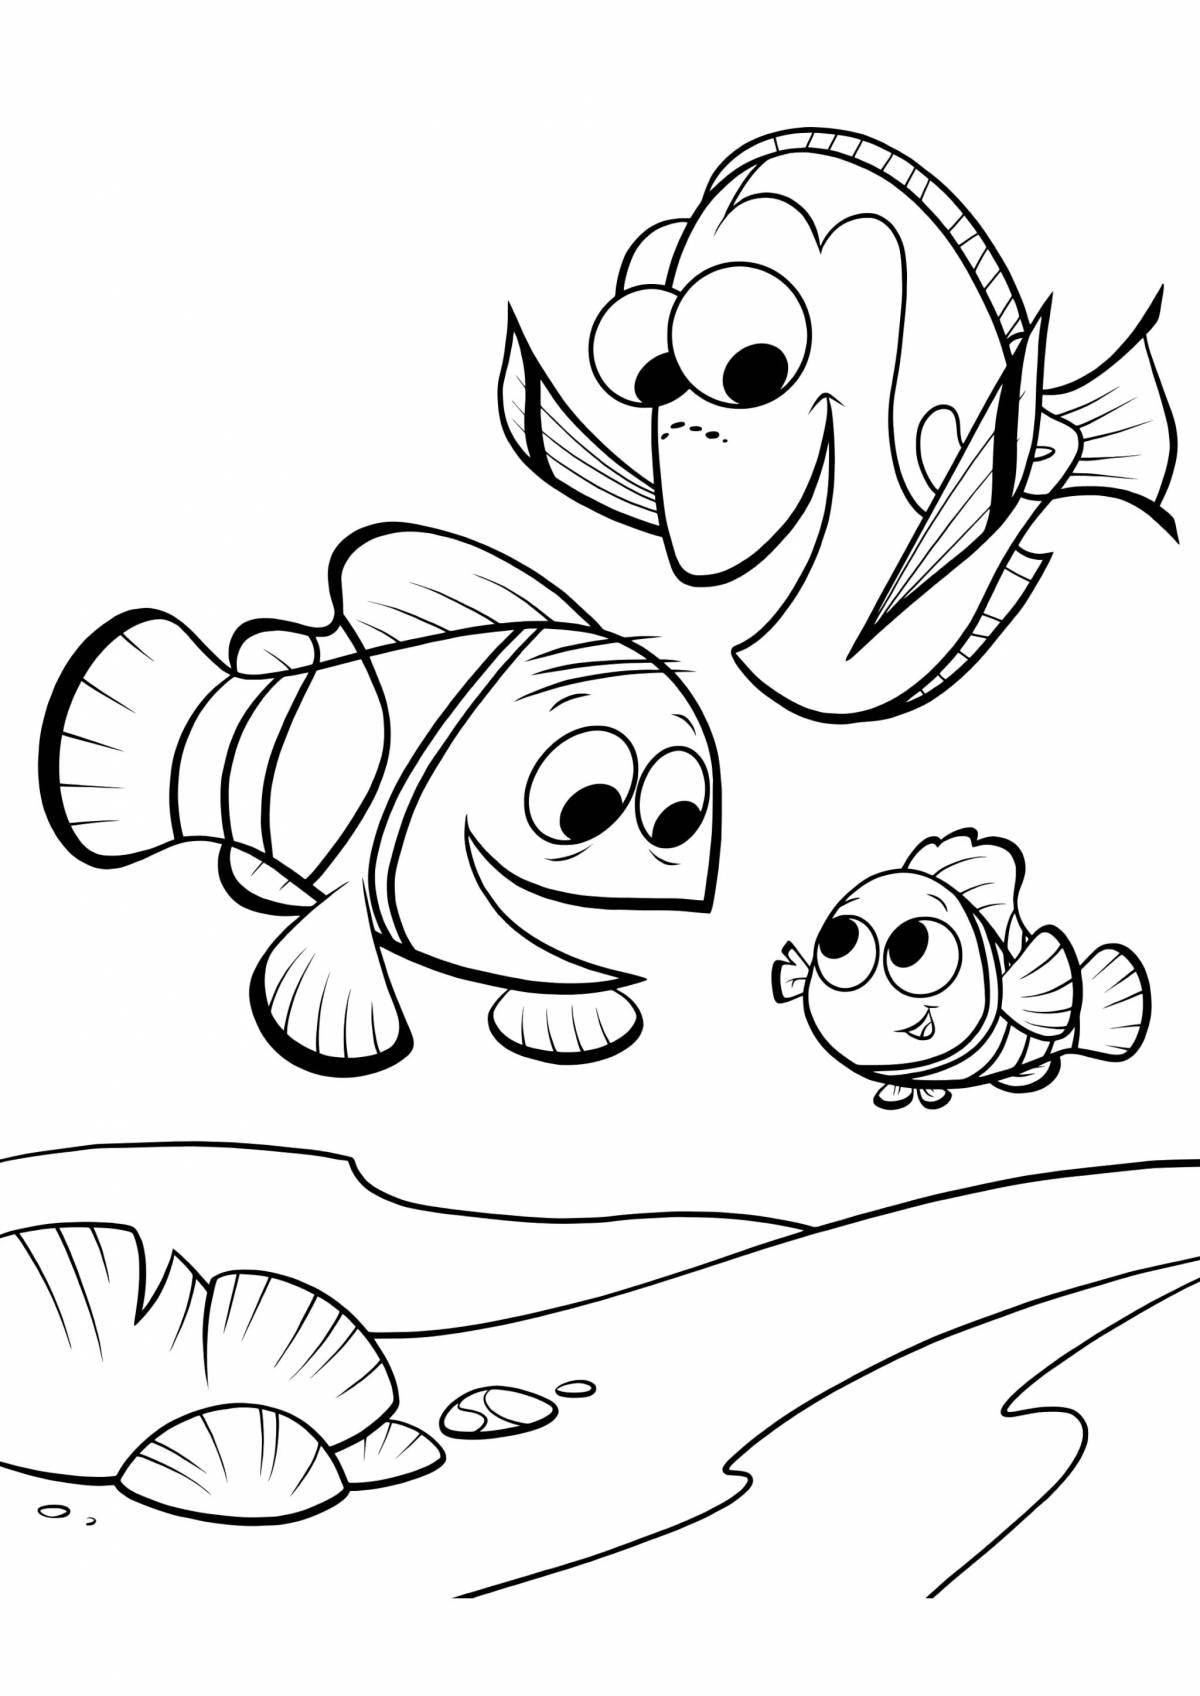 Colourful nemo and dory coloring